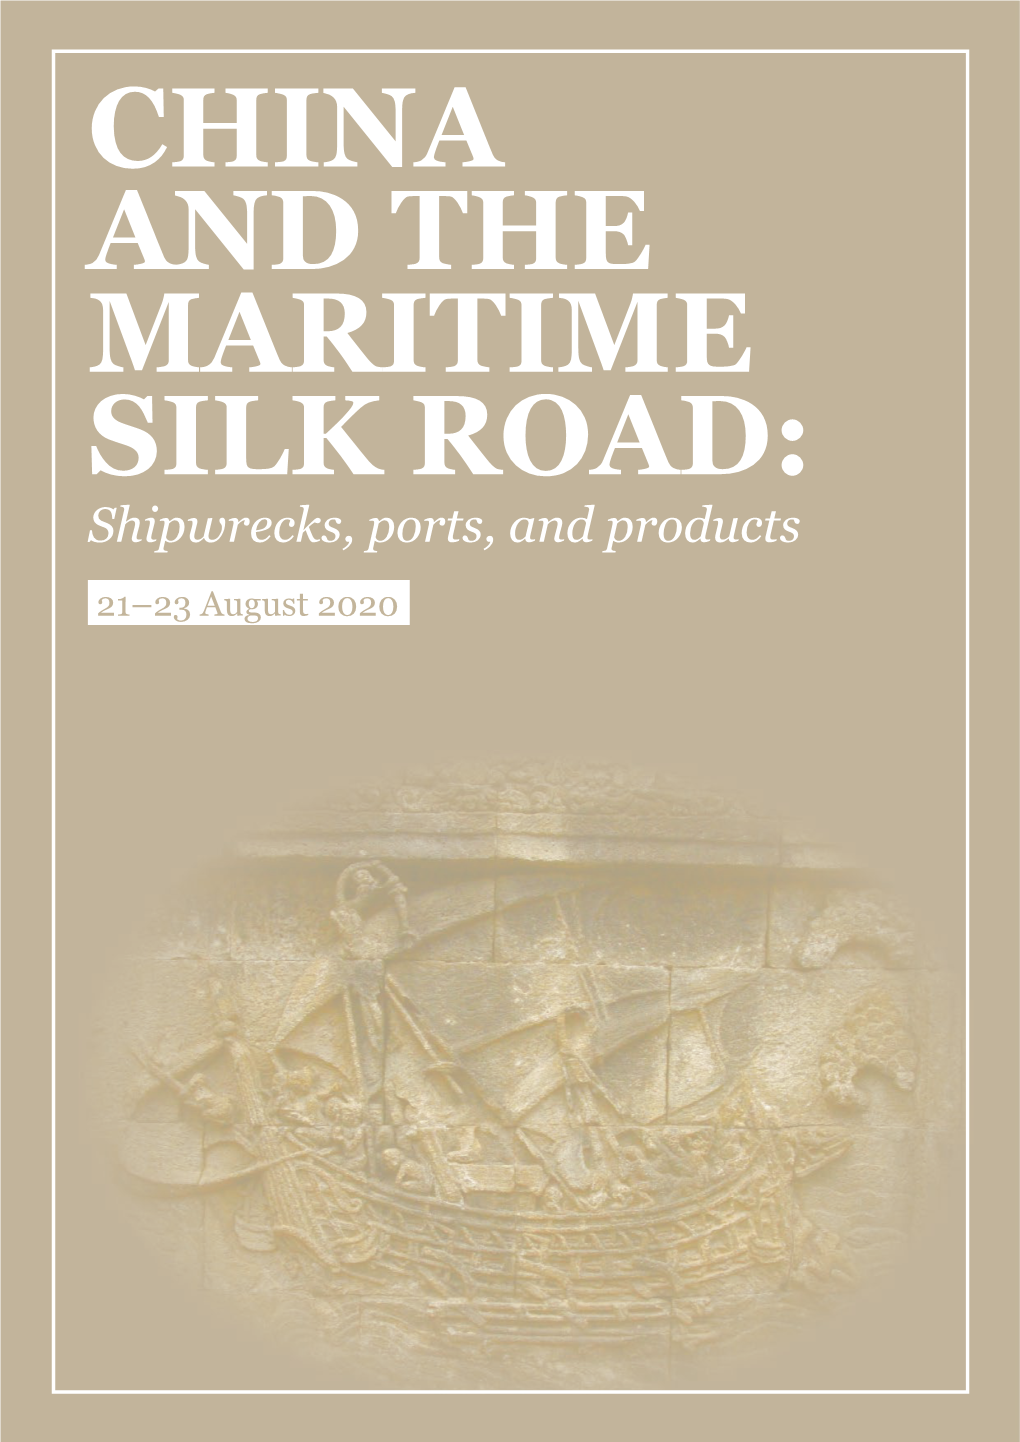 Shipwrecks, Ports, and Products